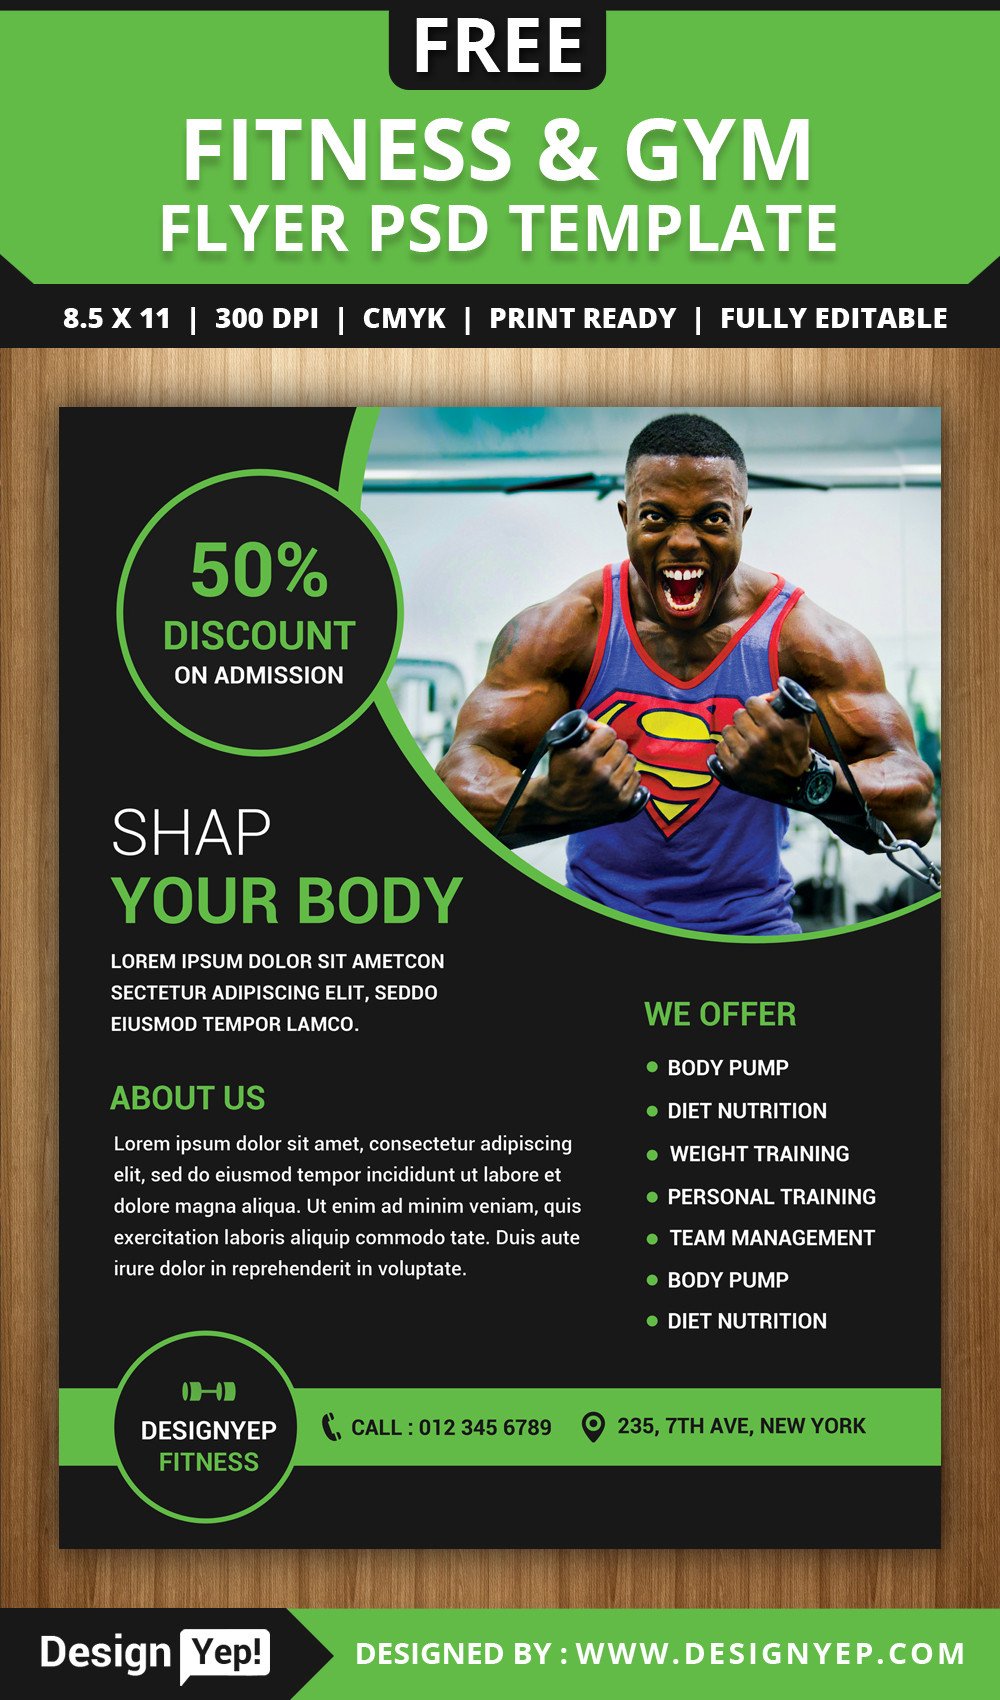 Fitness Flyer Template Free Free Gym and Fitness Flyer Psd Template Designyep